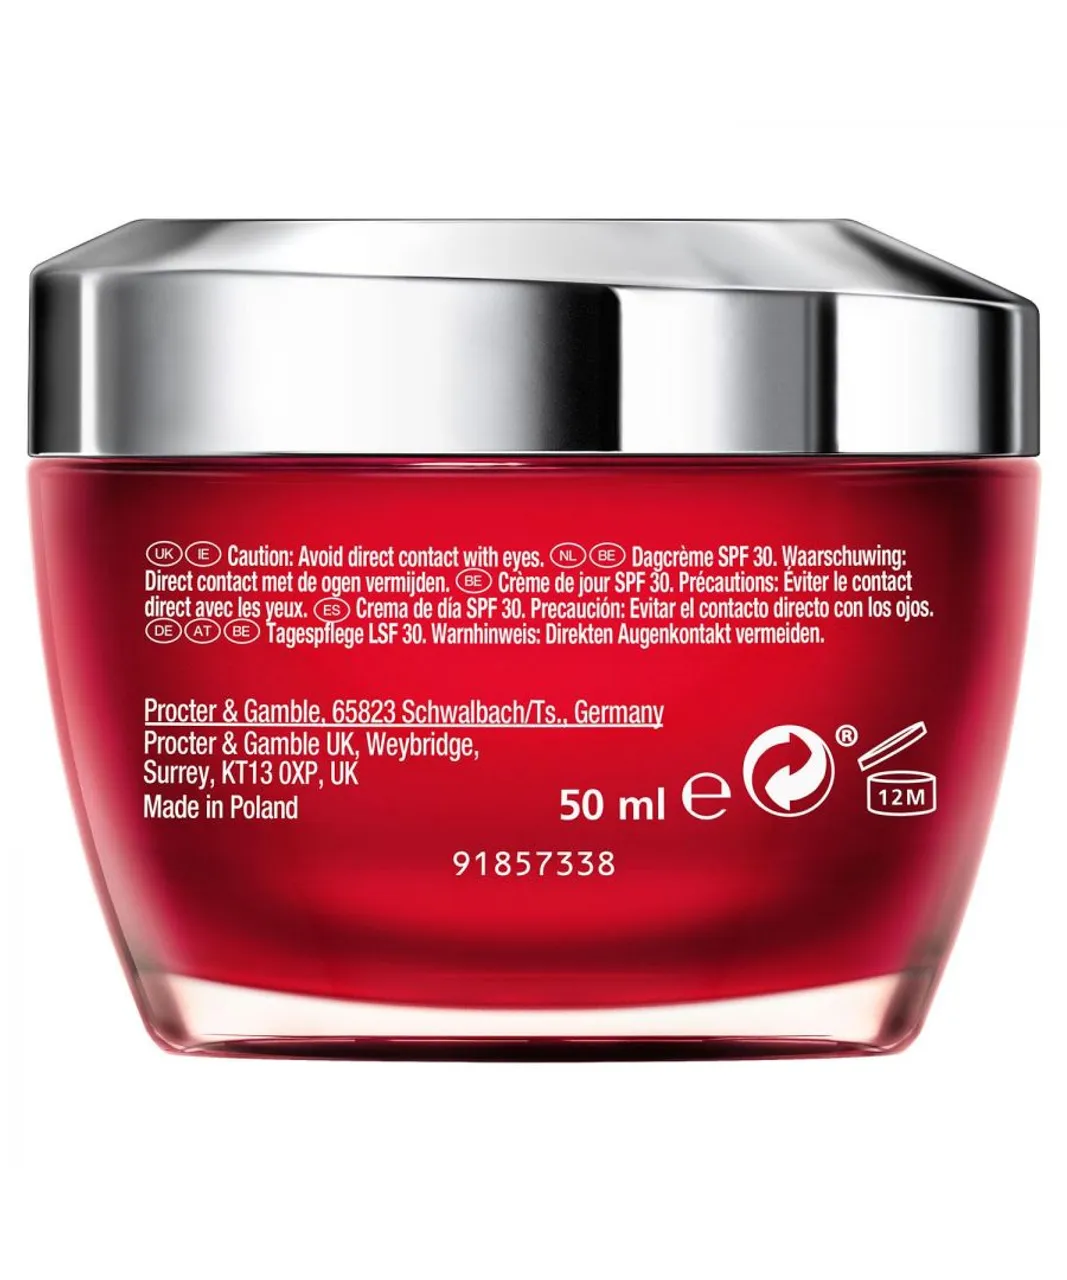 Olay Womens Regenerist Day Face Cream with Vitamin B3 & Niacinamide SPF 30, 50ml - One Size